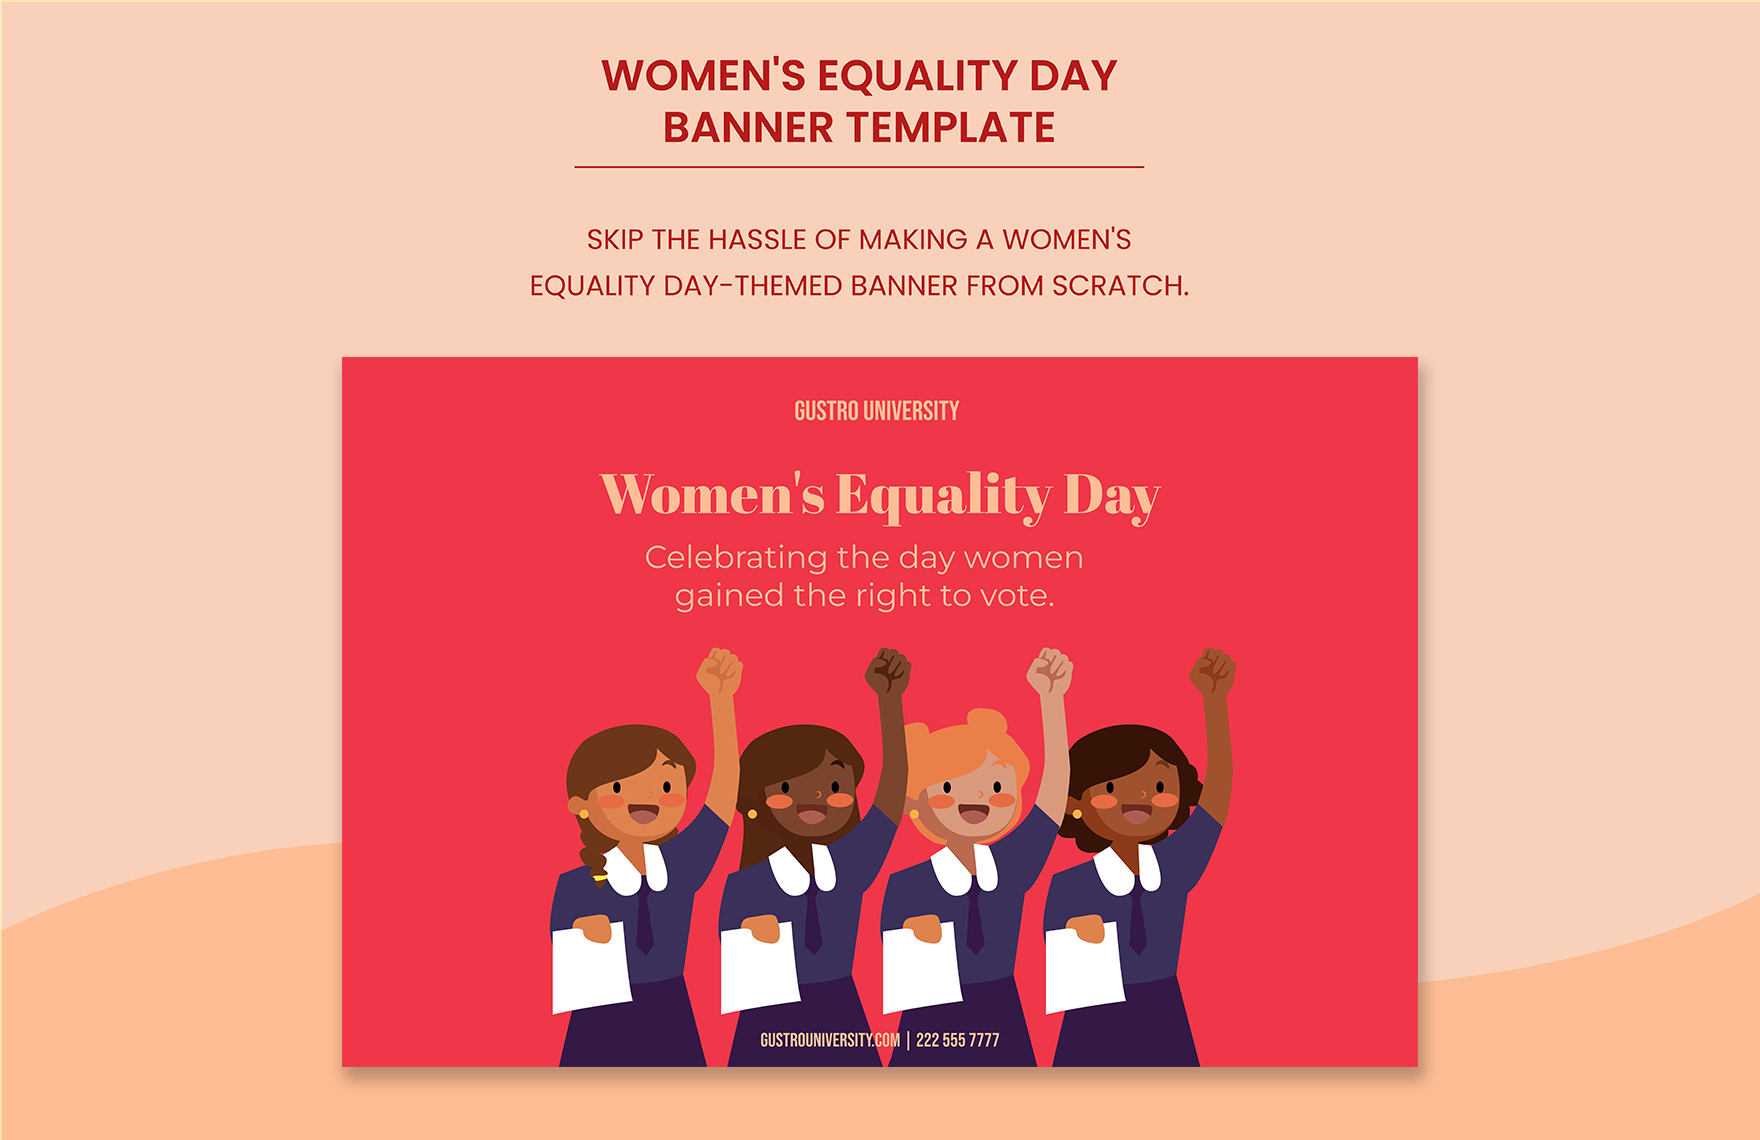 Free Women's Equality Day Banner Template in PDF, Illustrator, SVG, PNG